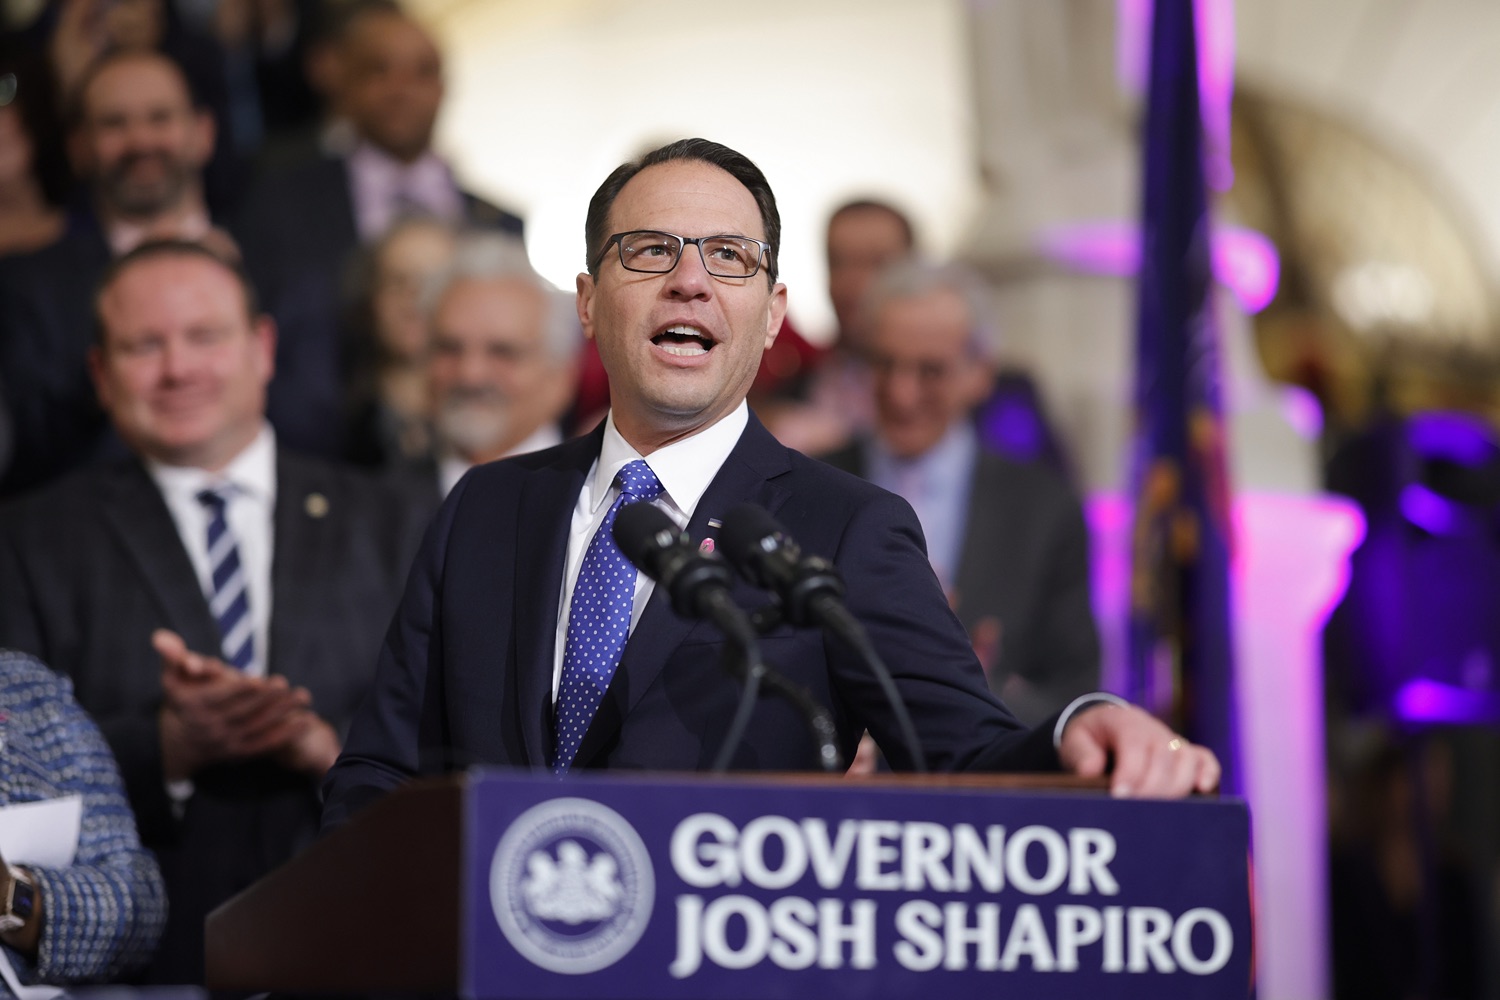 Governor Josh Shapiro signed the first bill of his Administration - Act 1 of 2023, a first-of-its-kind law in the nation that will require insurers to cover preventive breast and ovarian cancer screenings for high-risk women at no cost. MAY 01, 2023 - HARRISBURG, PA<br><a href="https://filesource.amperwave.net/commonwealthofpa/photo/23041_gov_sb8_dz_015.JPG" target="_blank">⇣ Download Photo</a>